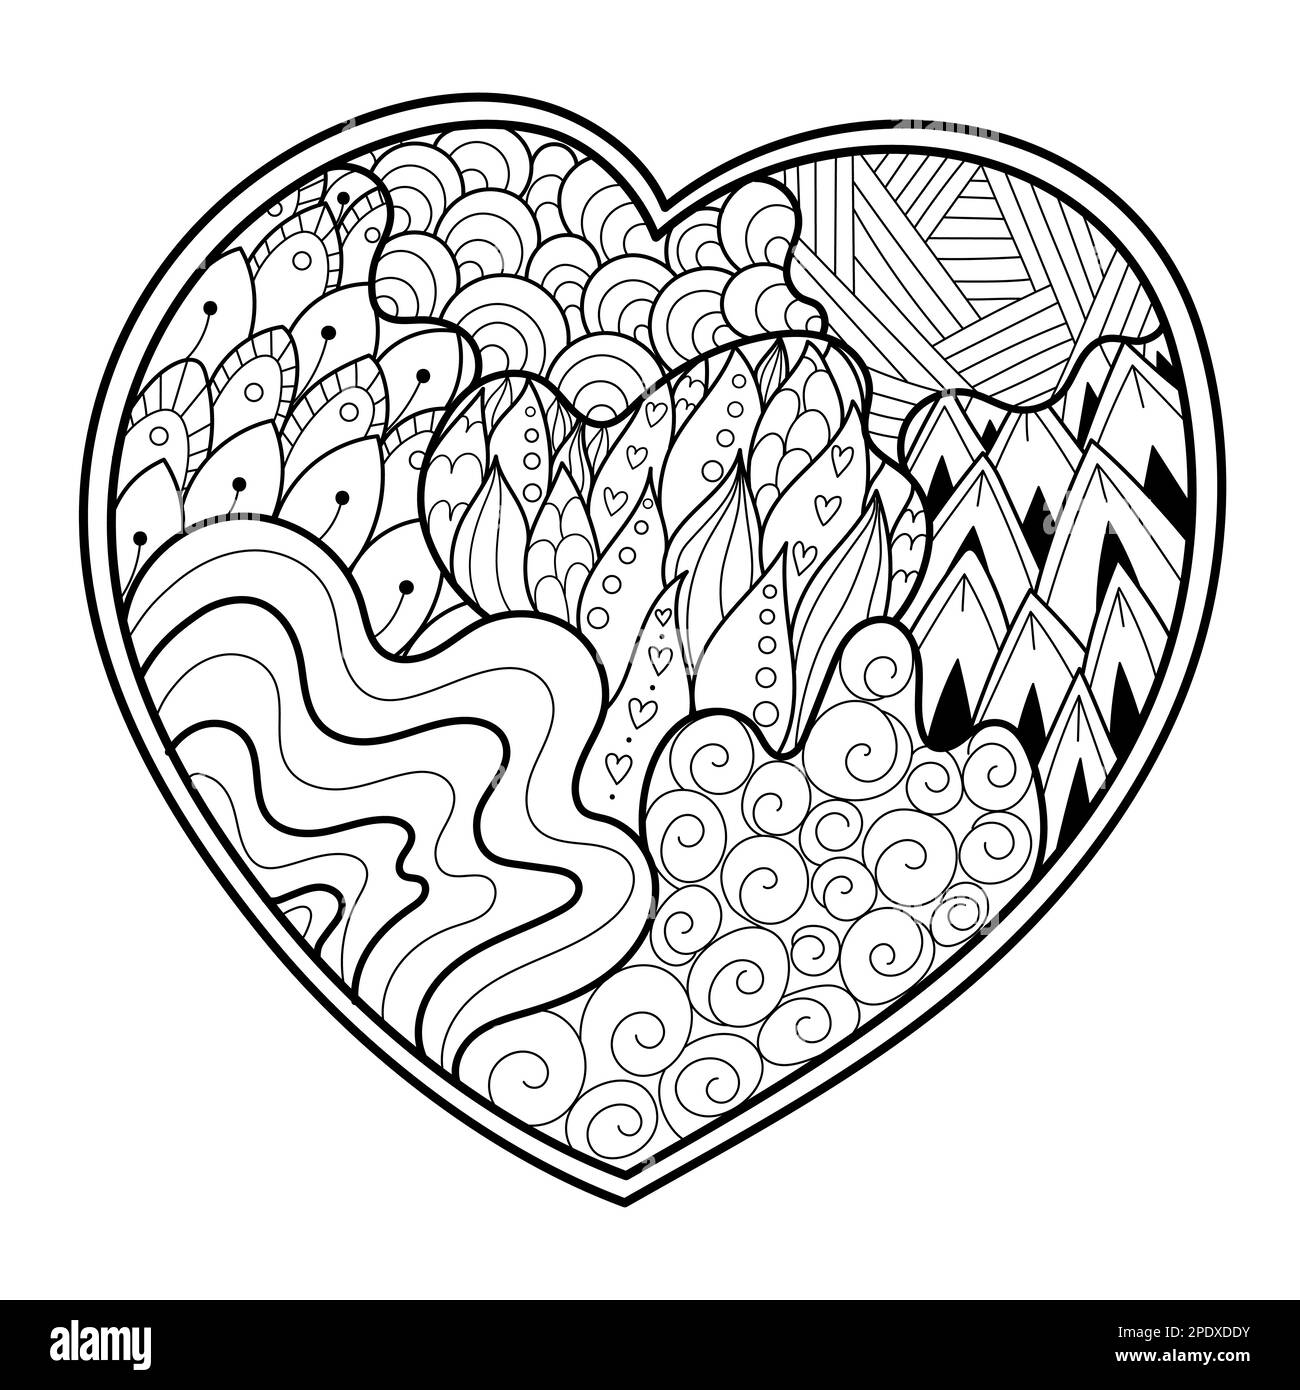 Doodle heart coloring page black and white love pattern for antistress coloring book stock vector image art